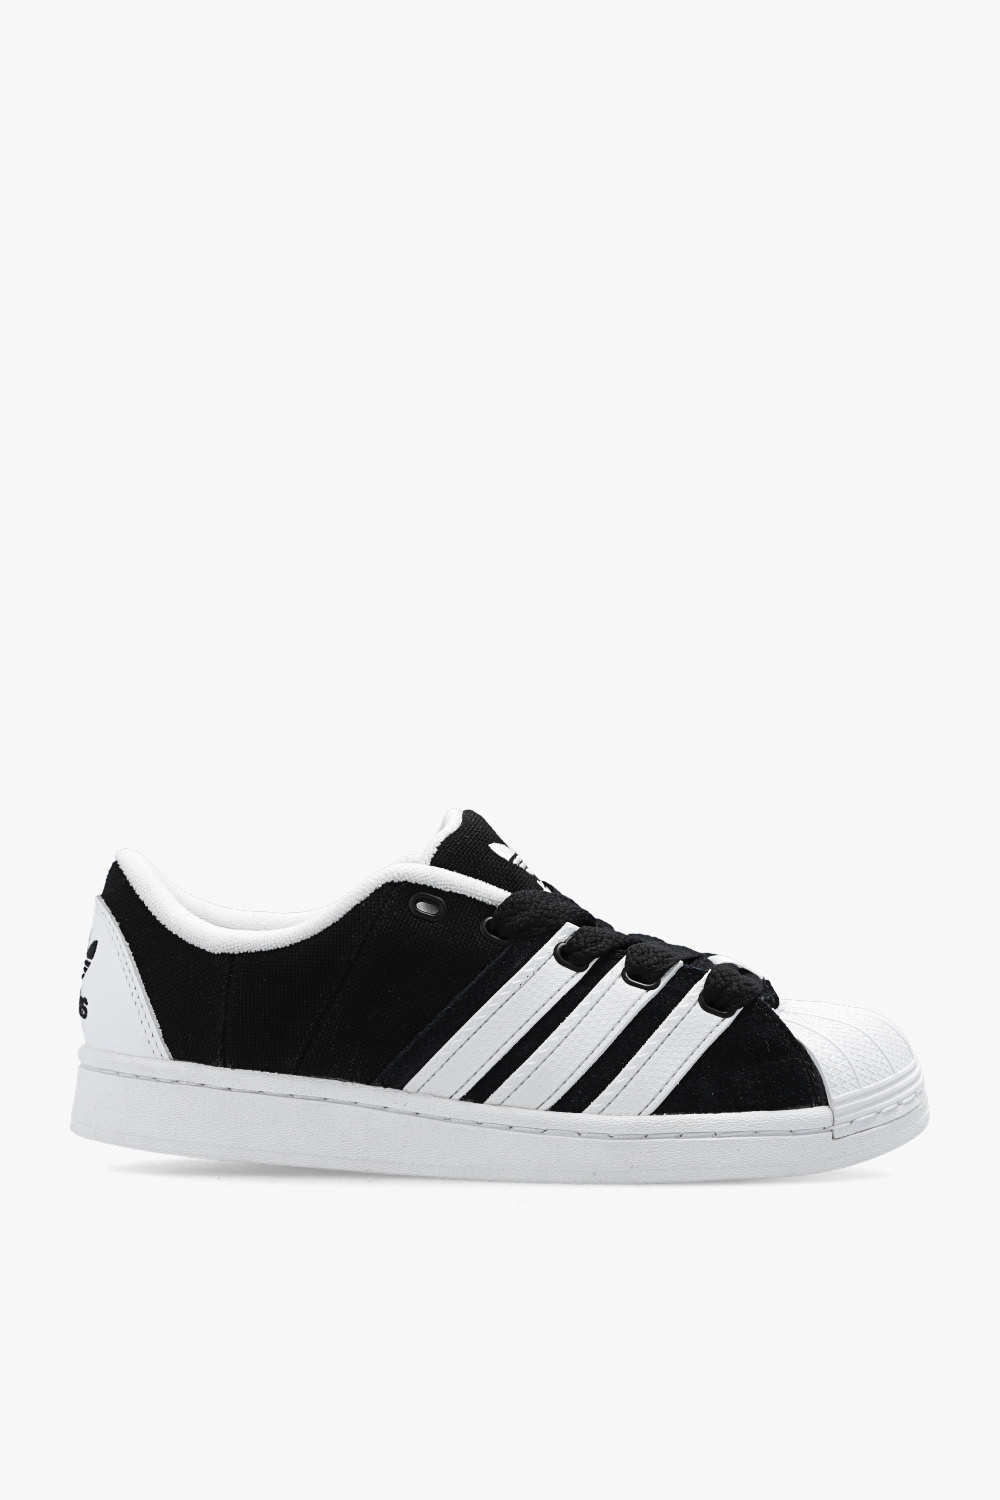 ADIDAS Originals \'SUPERSTAR | | SUPERMODIFIED\' info StclaircomoShops dress ideas girls adults sneakers for adidas | Shoes Men\'s poster